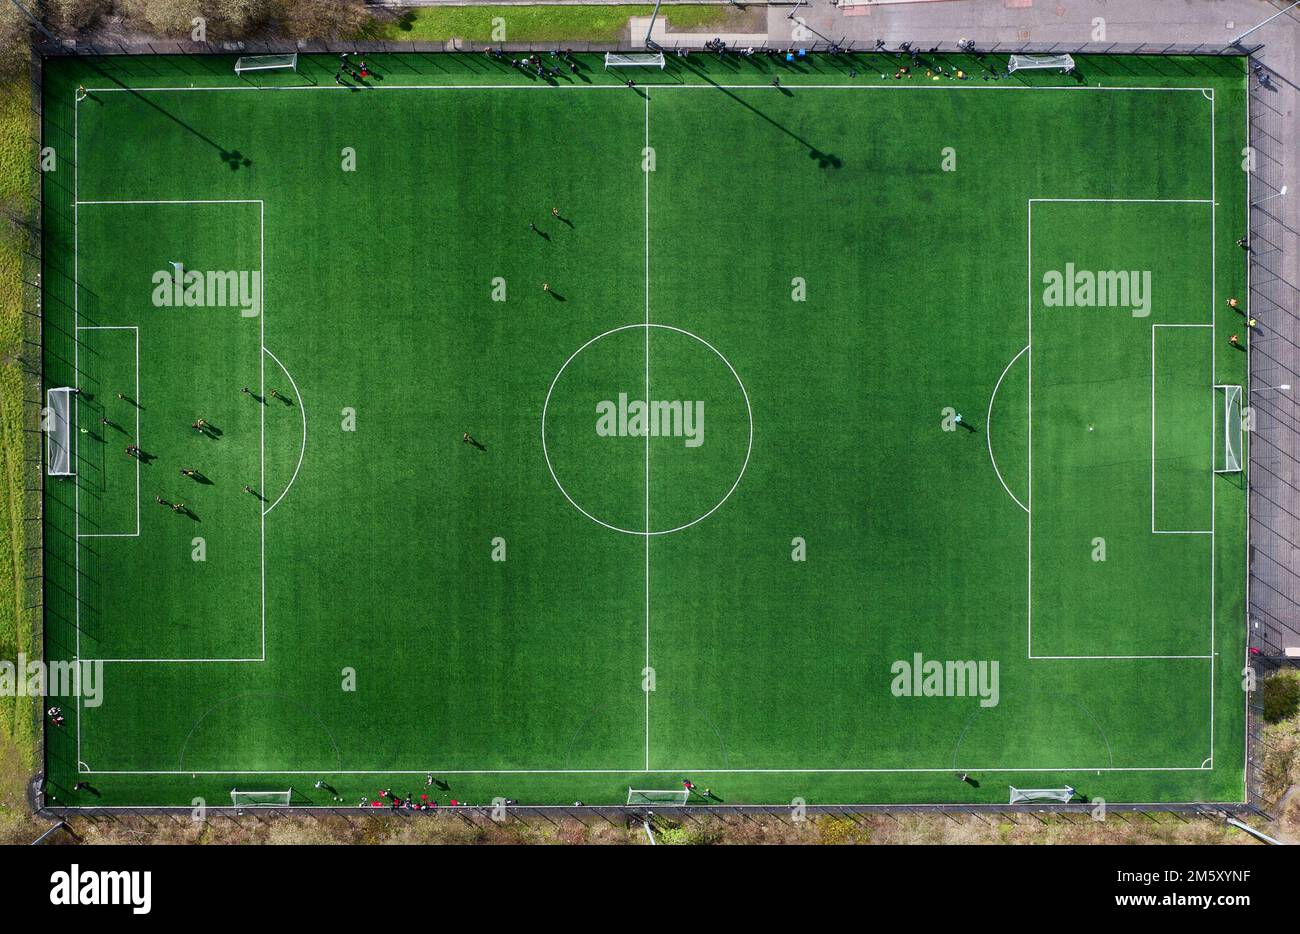 Football pitch aerial view from high above Stock Photo